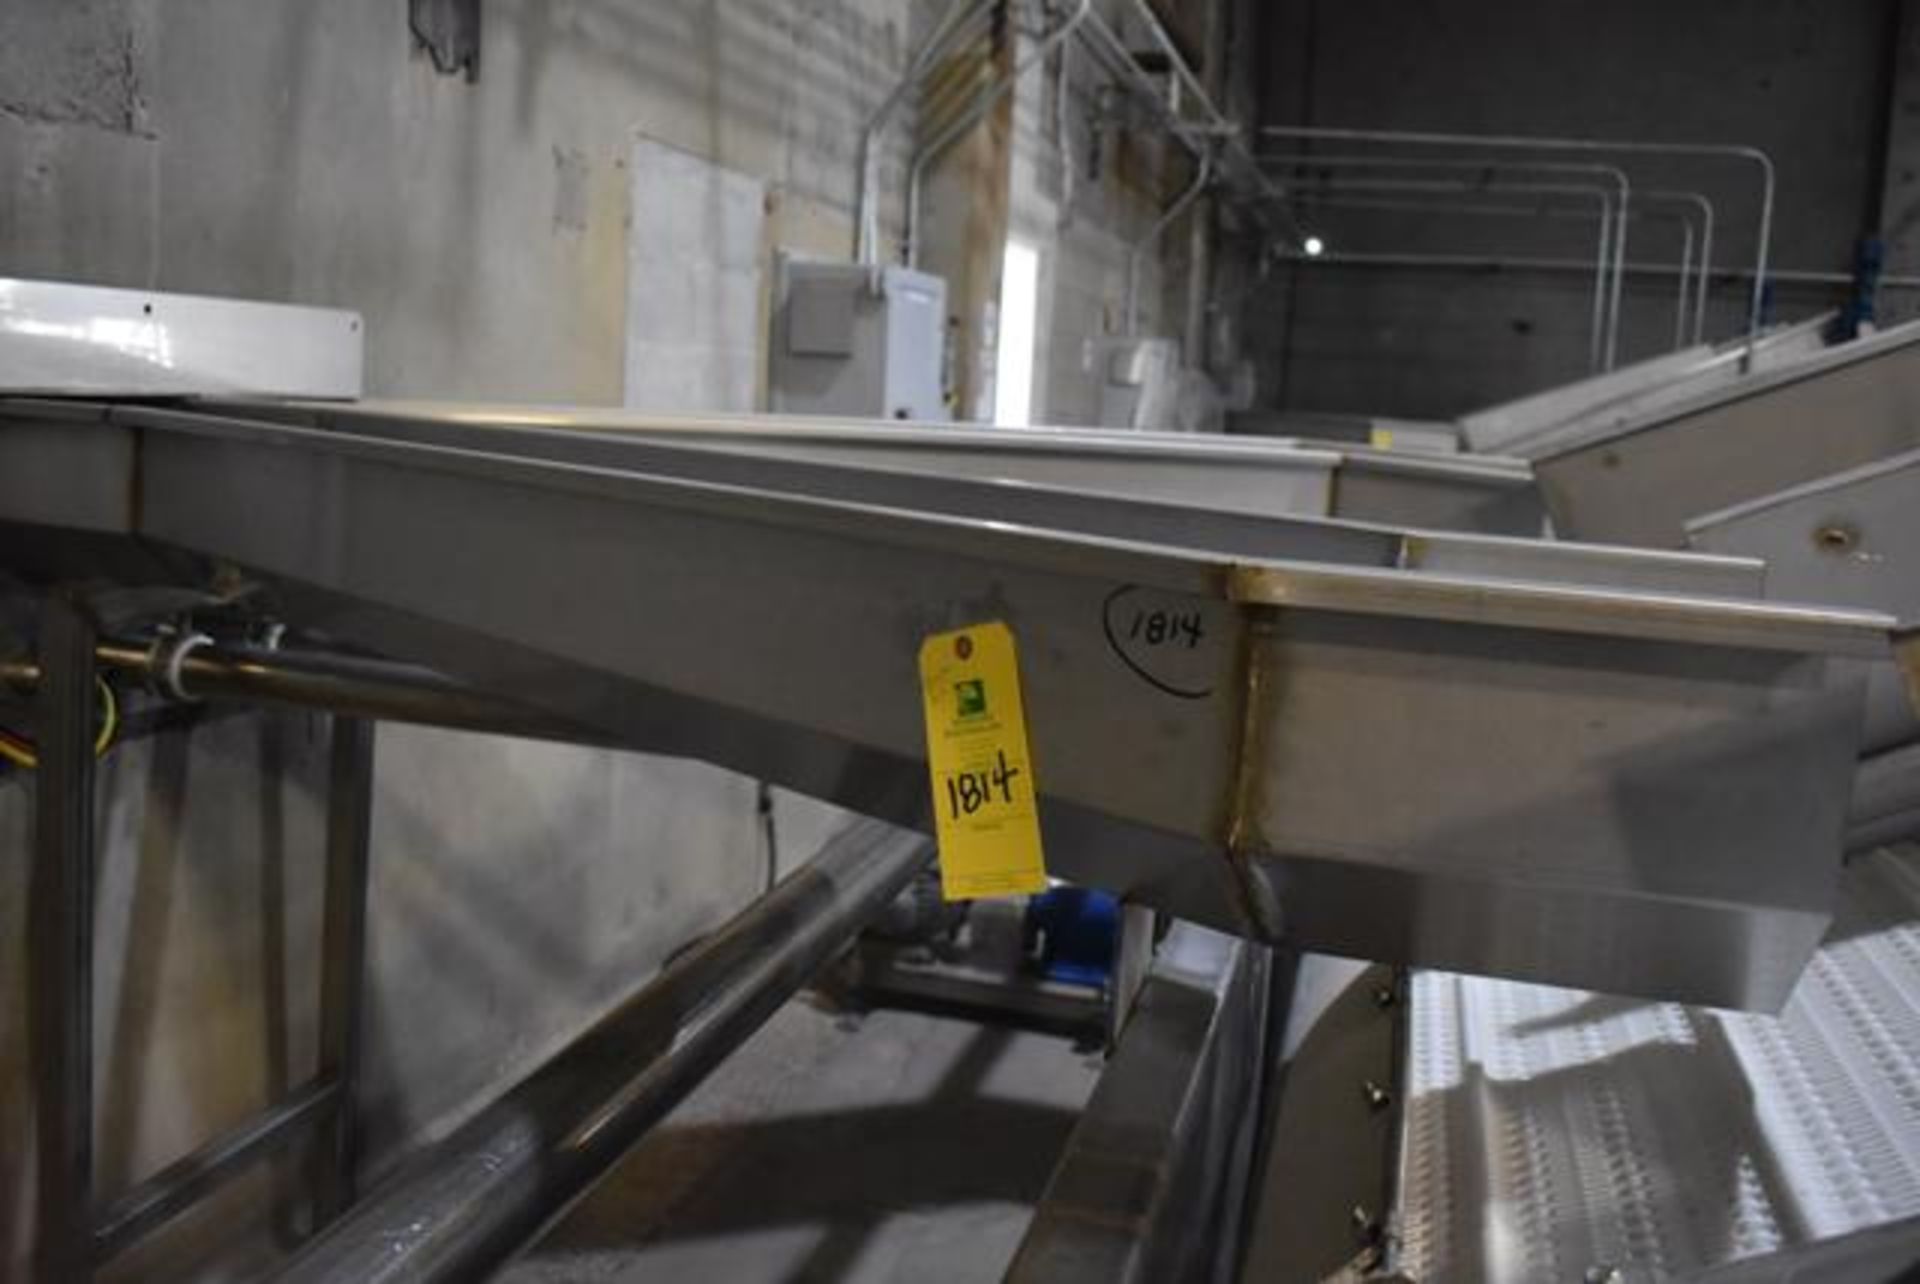 Line #1 - Cherry, Stainless Steel Flume, 12' Top x 5" Bottom x 9" Deep, RIGGING FEE: $300